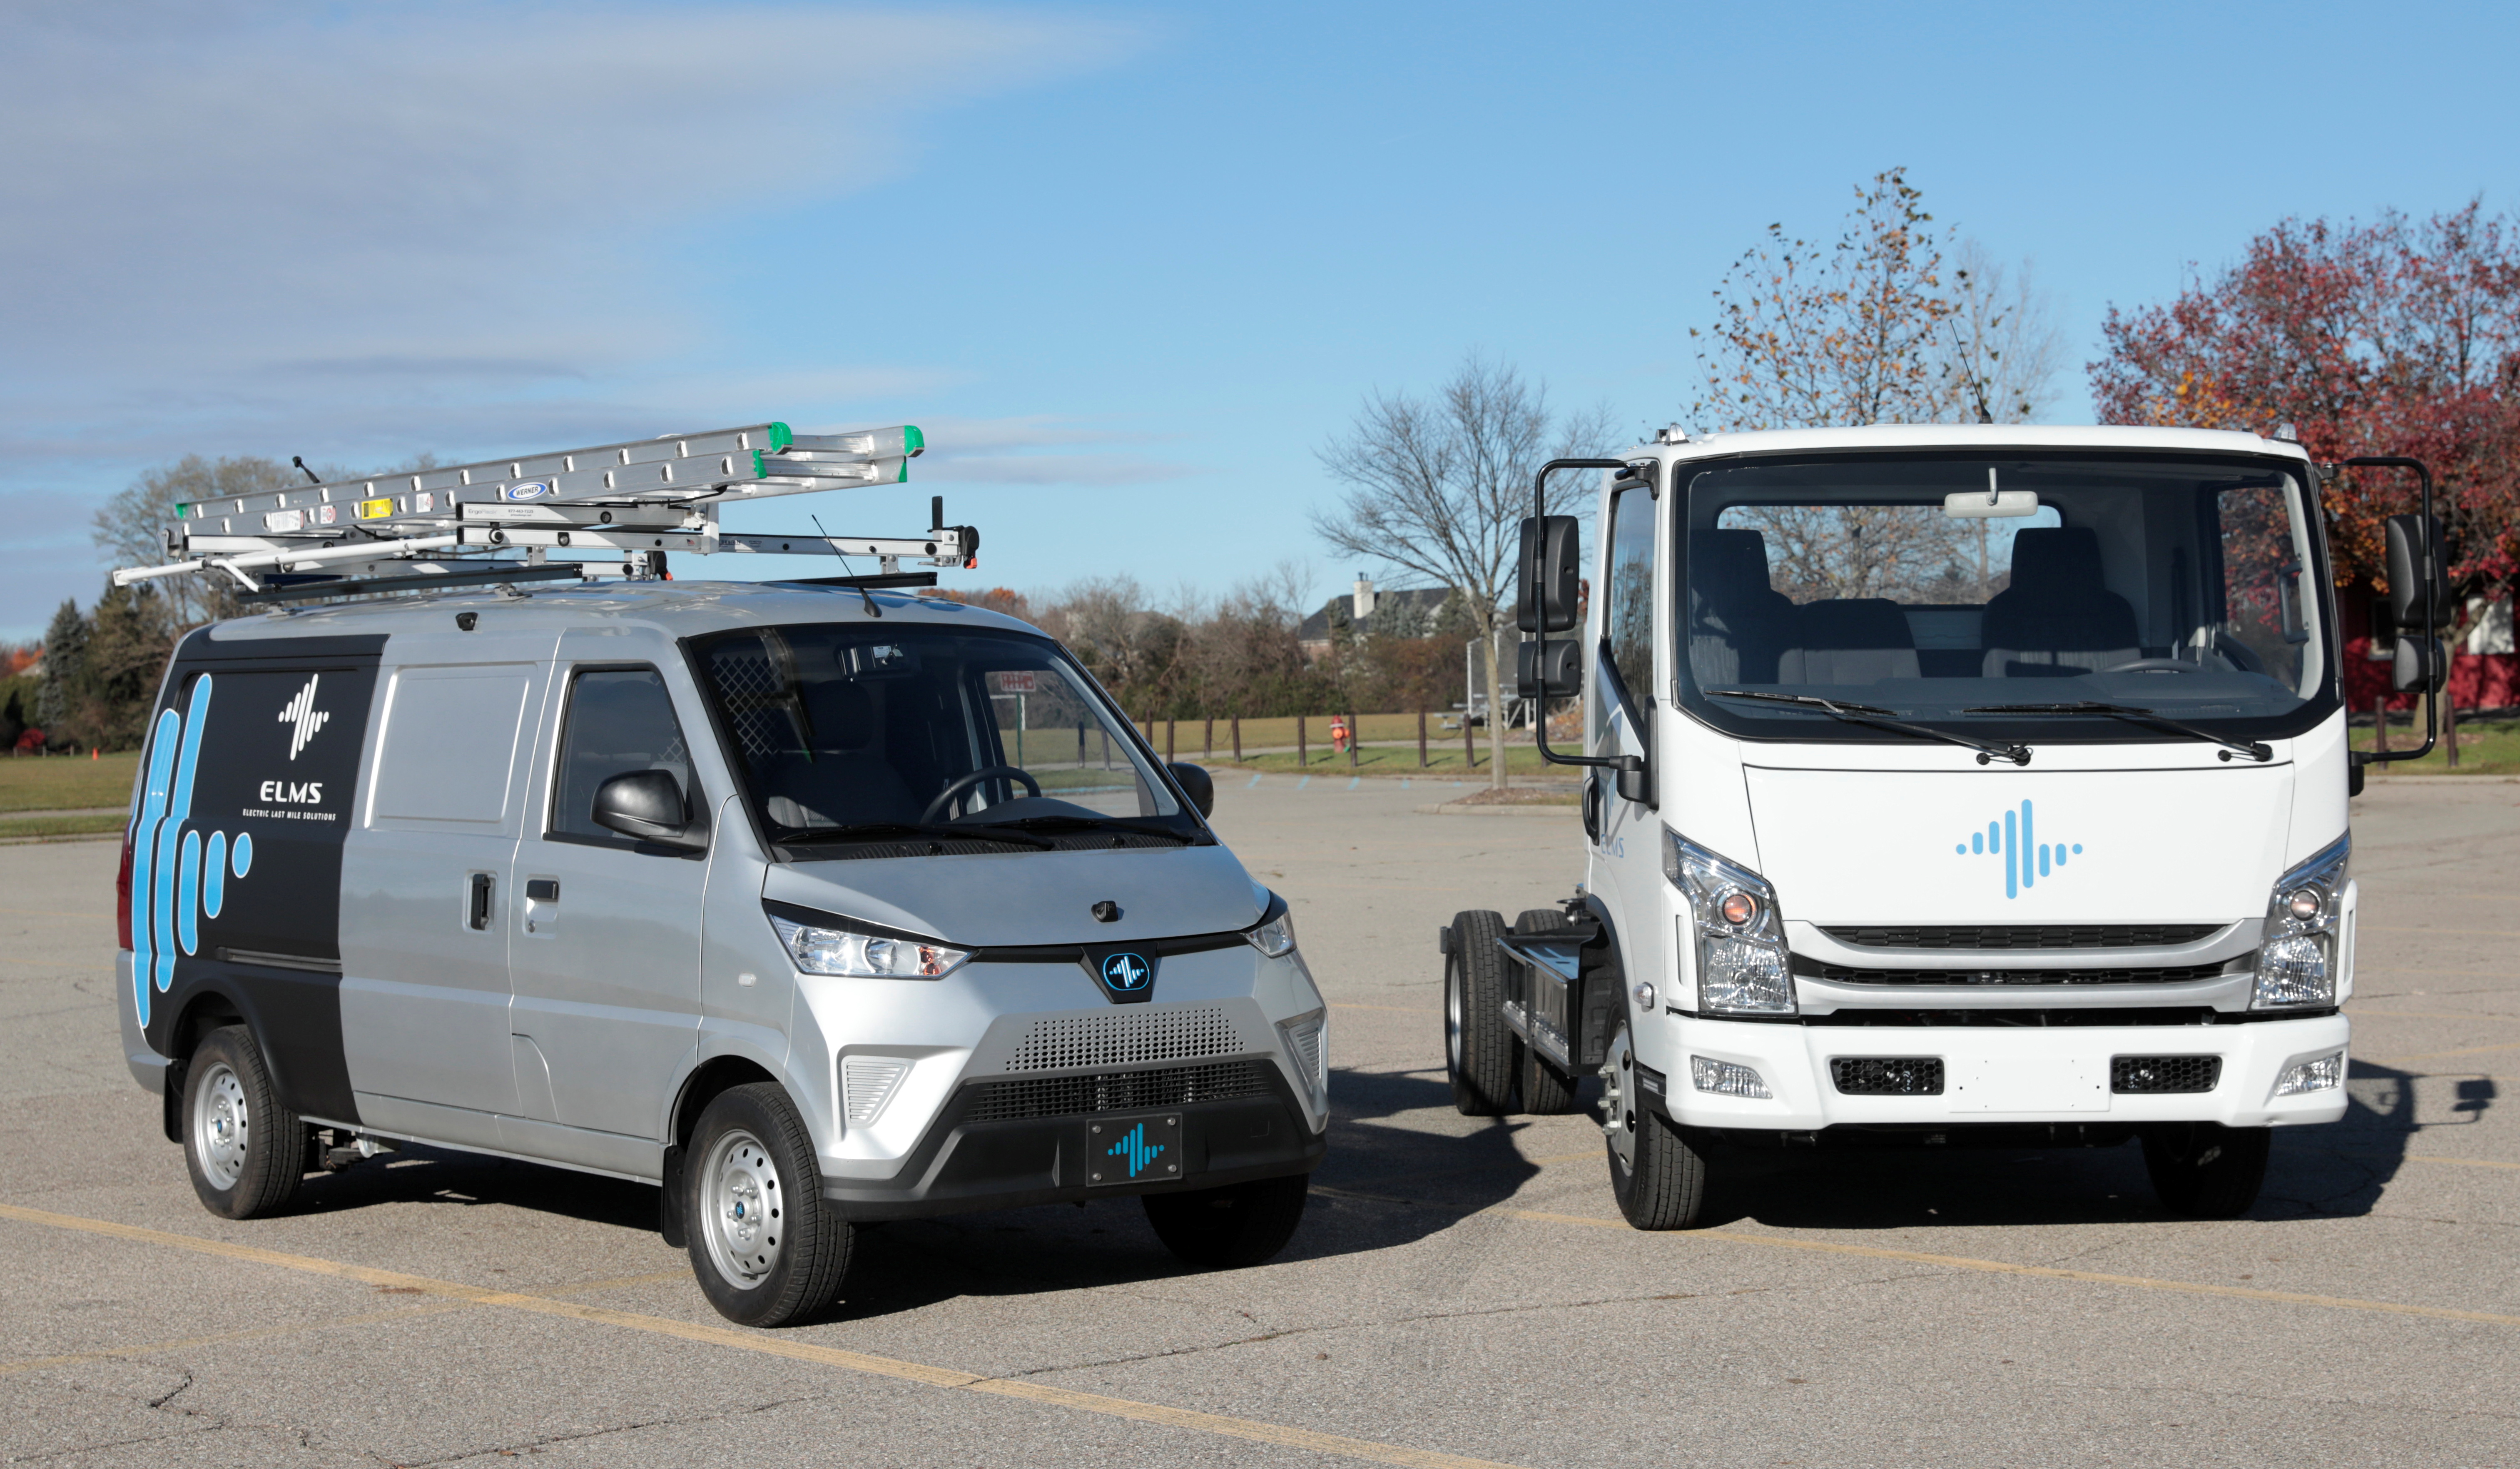 FILE PHOTO - U.S. commercial electric vehicle maker Electric Last Mile Solutions (ELMS) shows its all-electric Urban Utility van and commercial truck